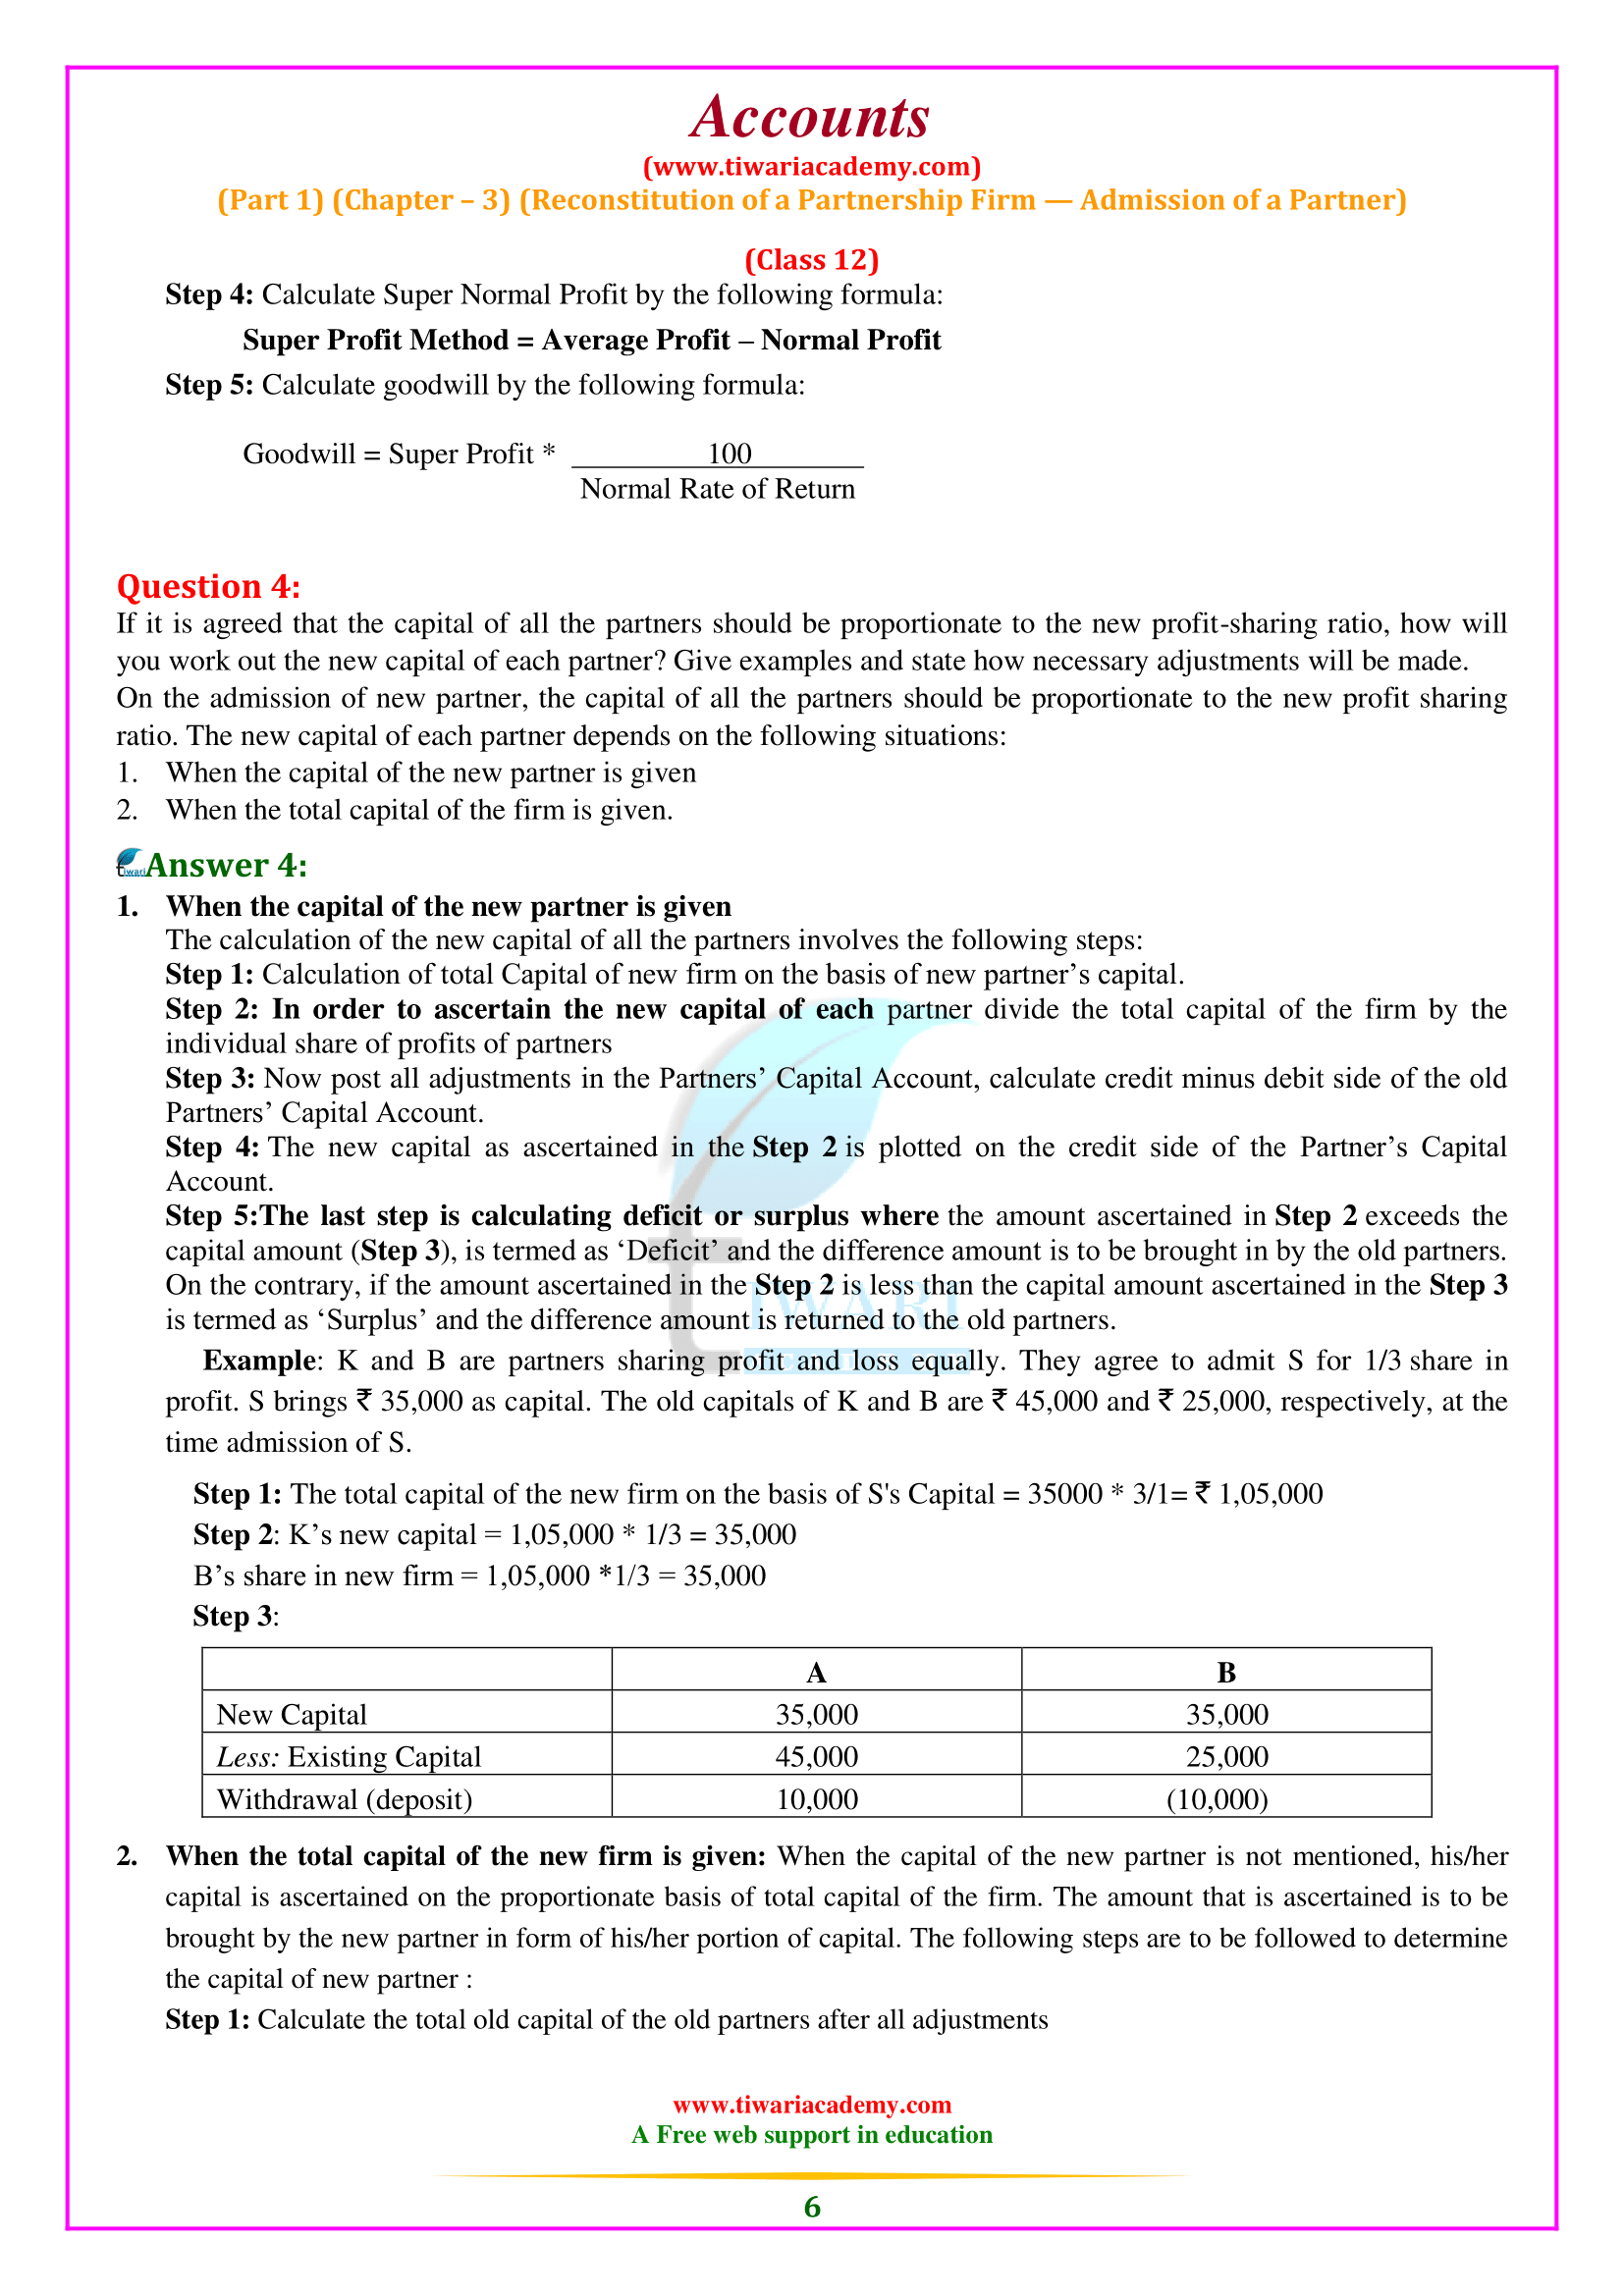 NCERT Solutions for Class 12 Accountancy Chapter 3